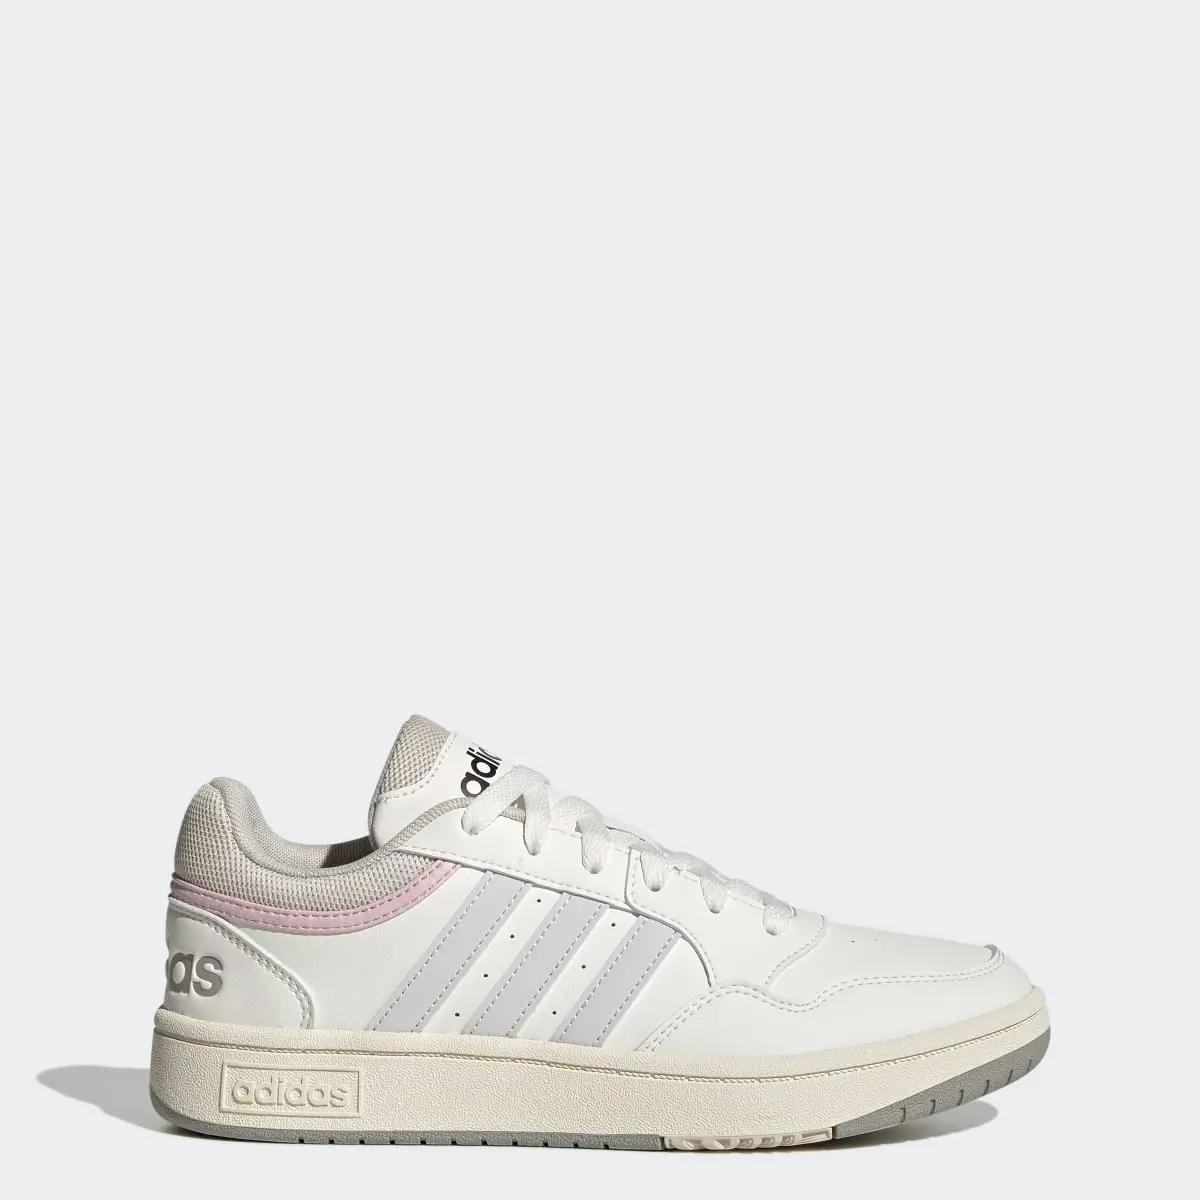 Adidas Hoops 3.0 Mid Lifestyle Basketball Low Shoes. 1